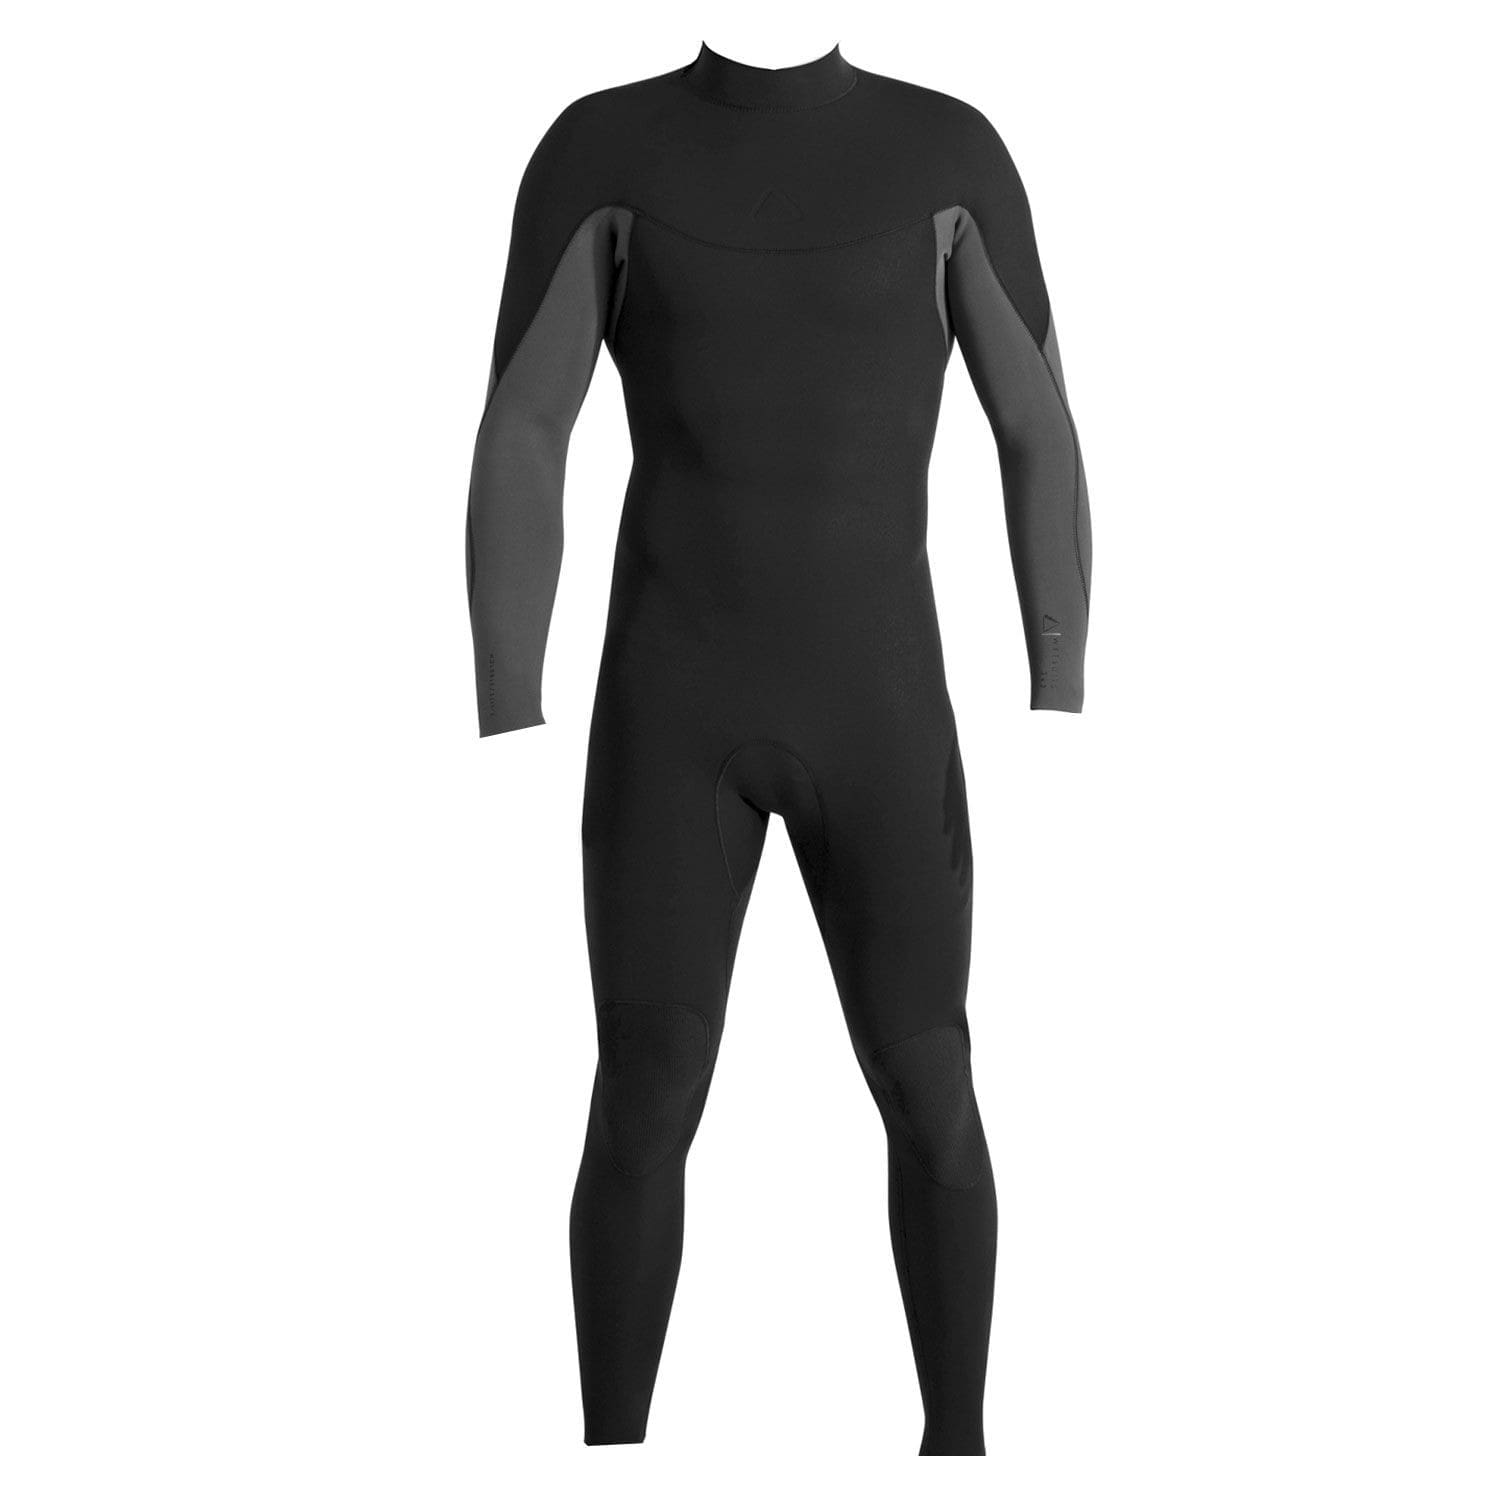 Follow 2021 Primary 3/2mm Steamer Wetsuit Black